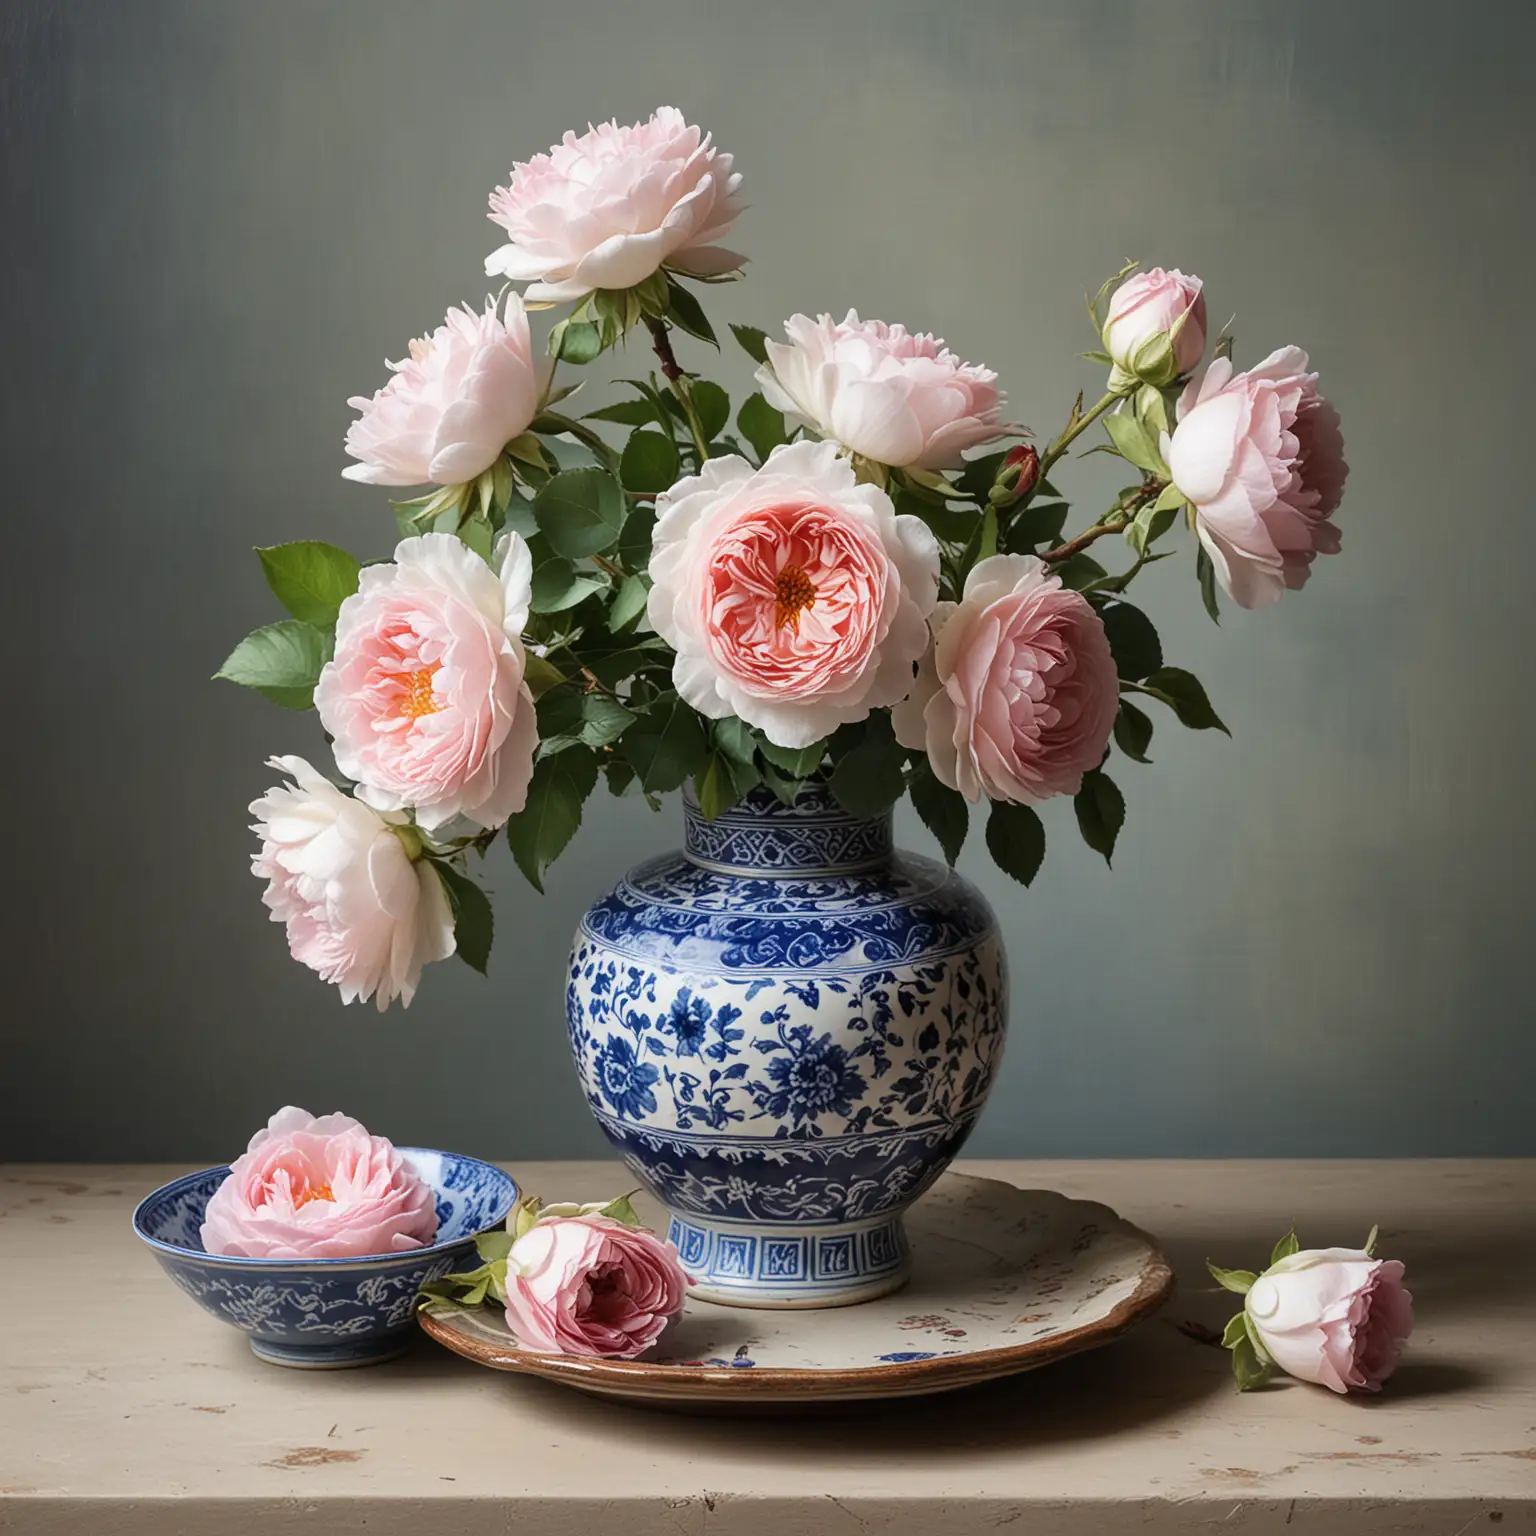 Elegant English Roses Still Life Painting with Blue and White Asian Vase